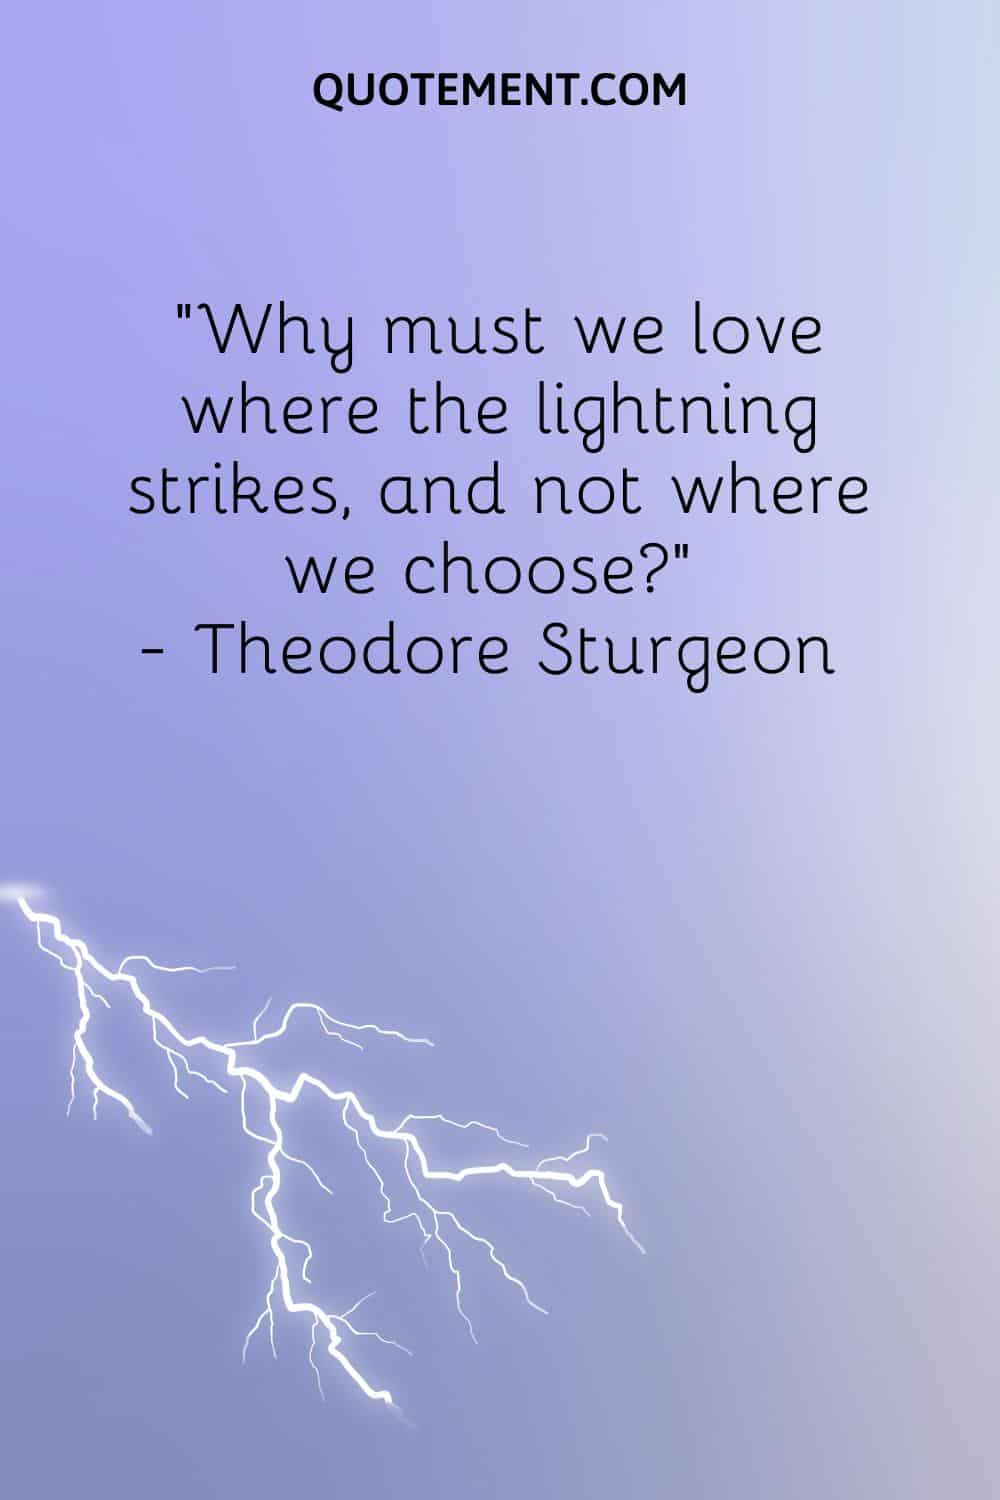 Why must we love where the lightning strikes, and not where we choose